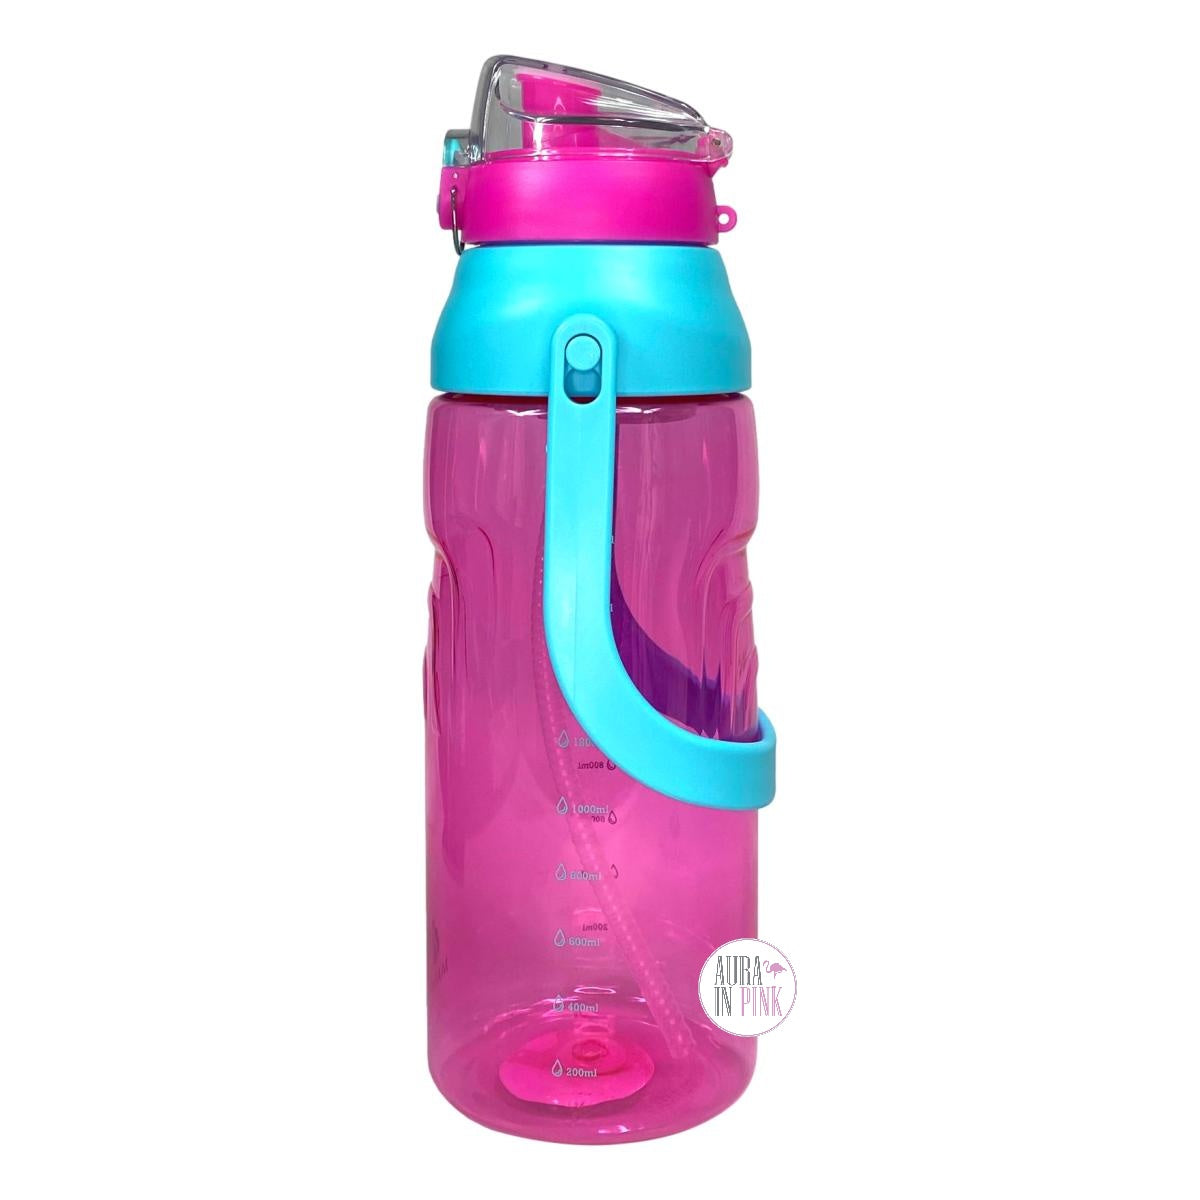 COOL GEAR 2-Pack 20 oz Essence Chugger Water Bottle with Wide